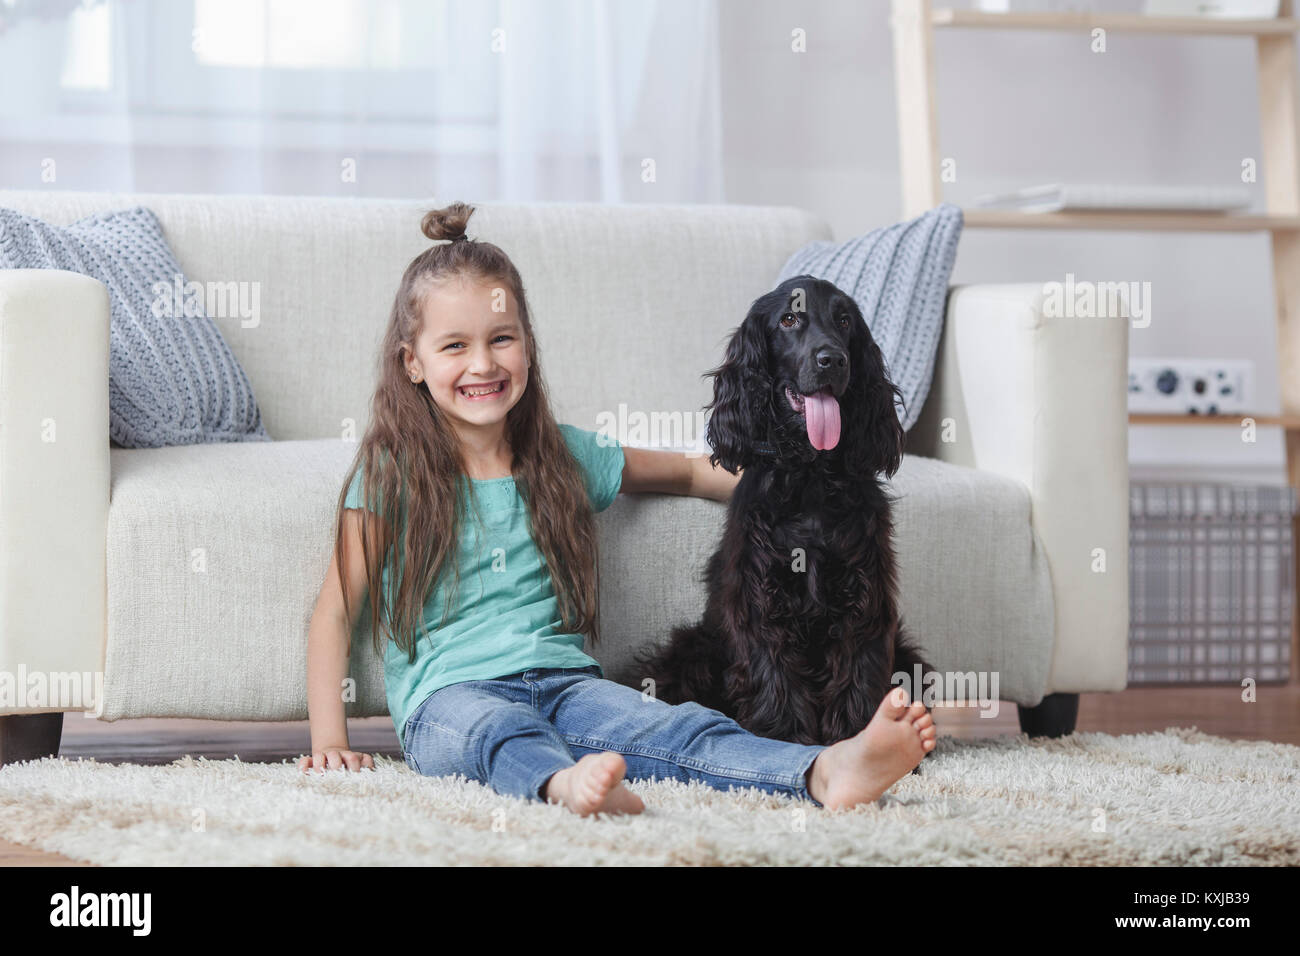 Portrait of cute girl sitting by Cocker Spaniel on rug at home Stock Photo